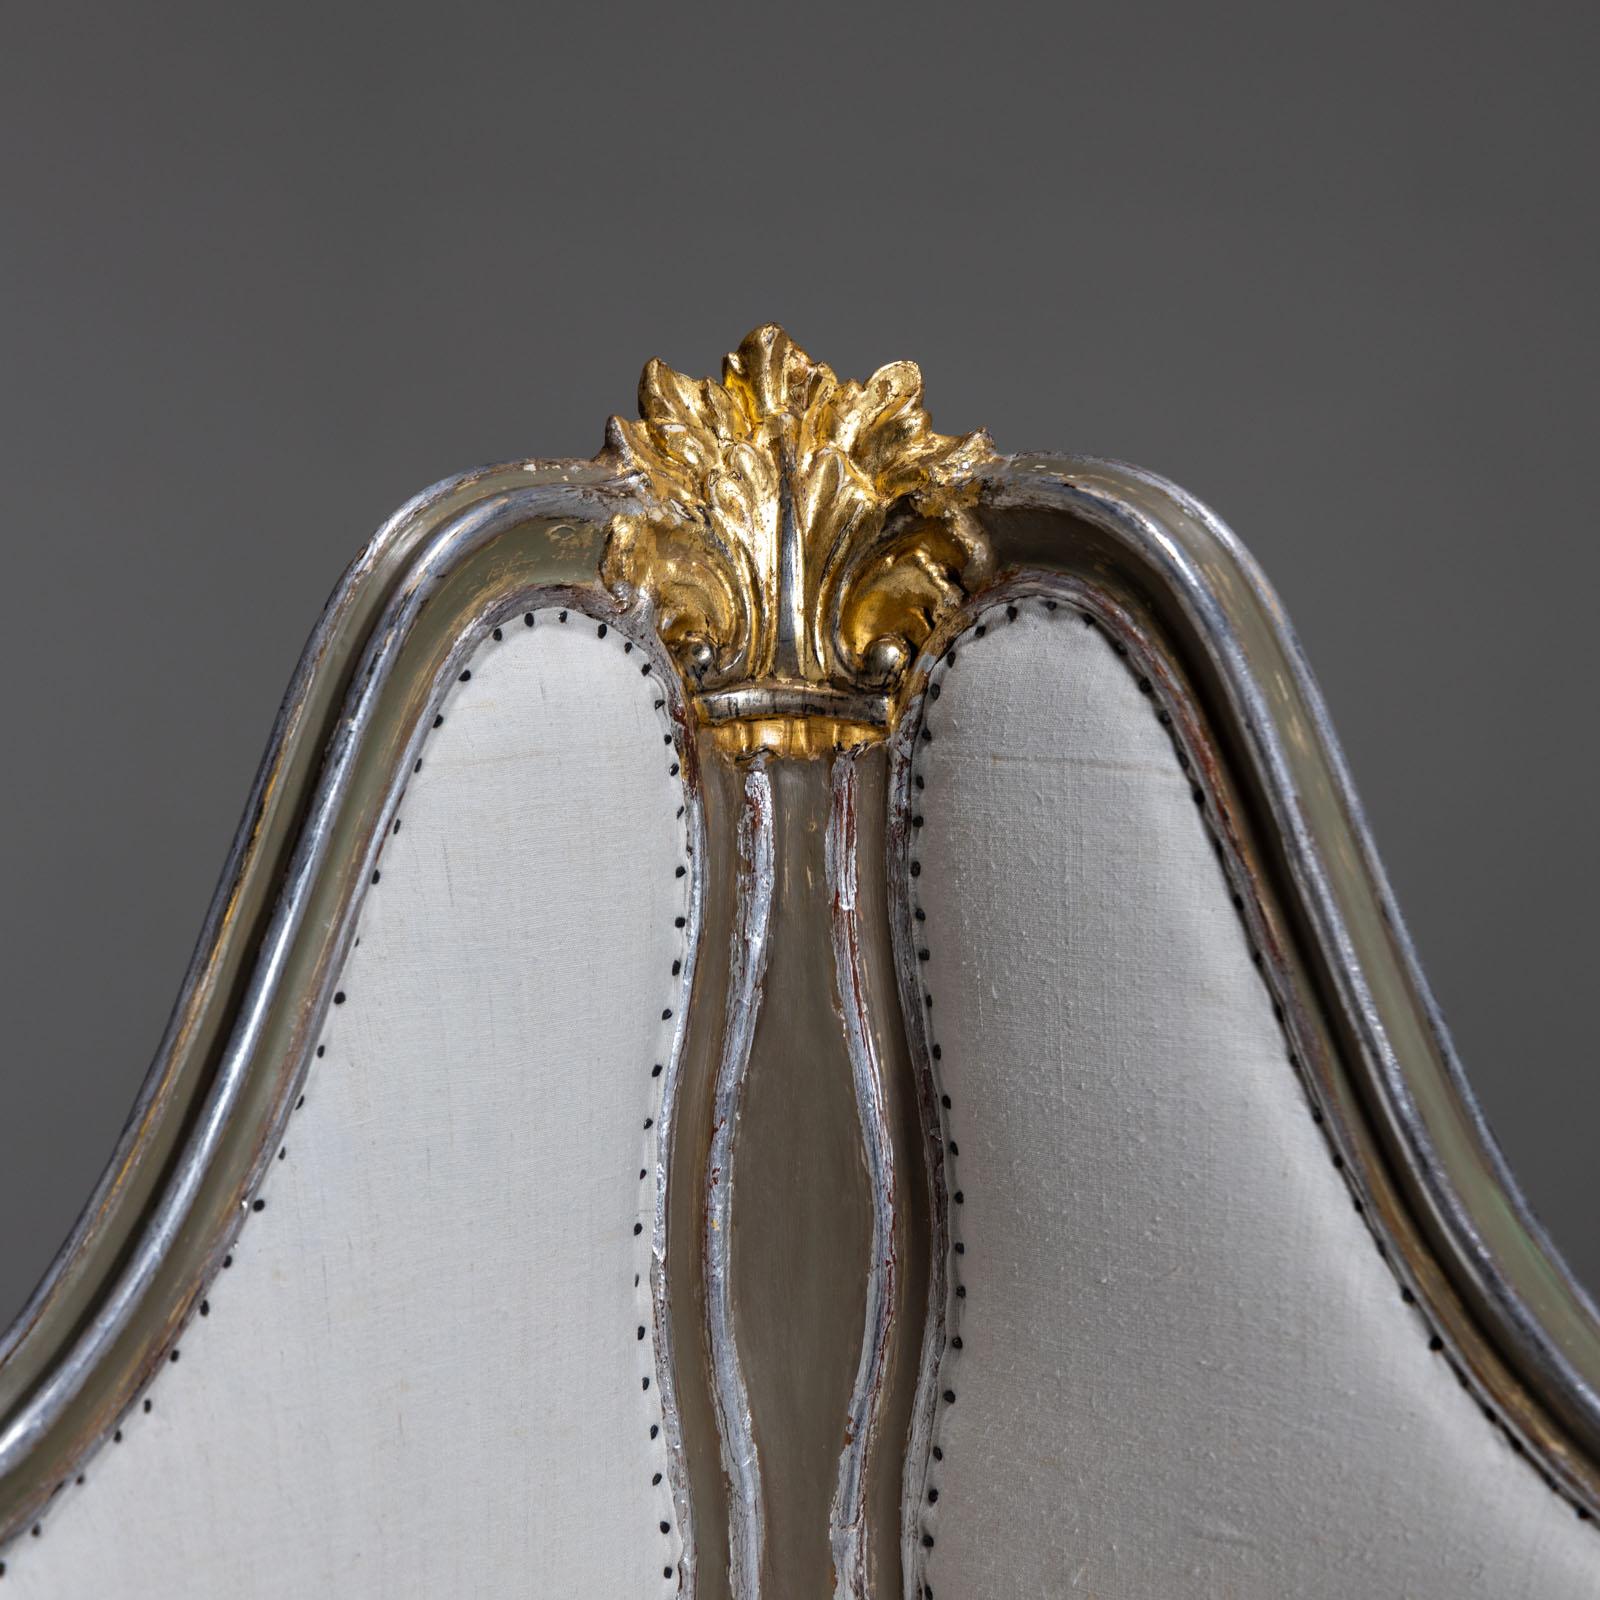 European Upholstered Corner armchair in baroque style, 19th century